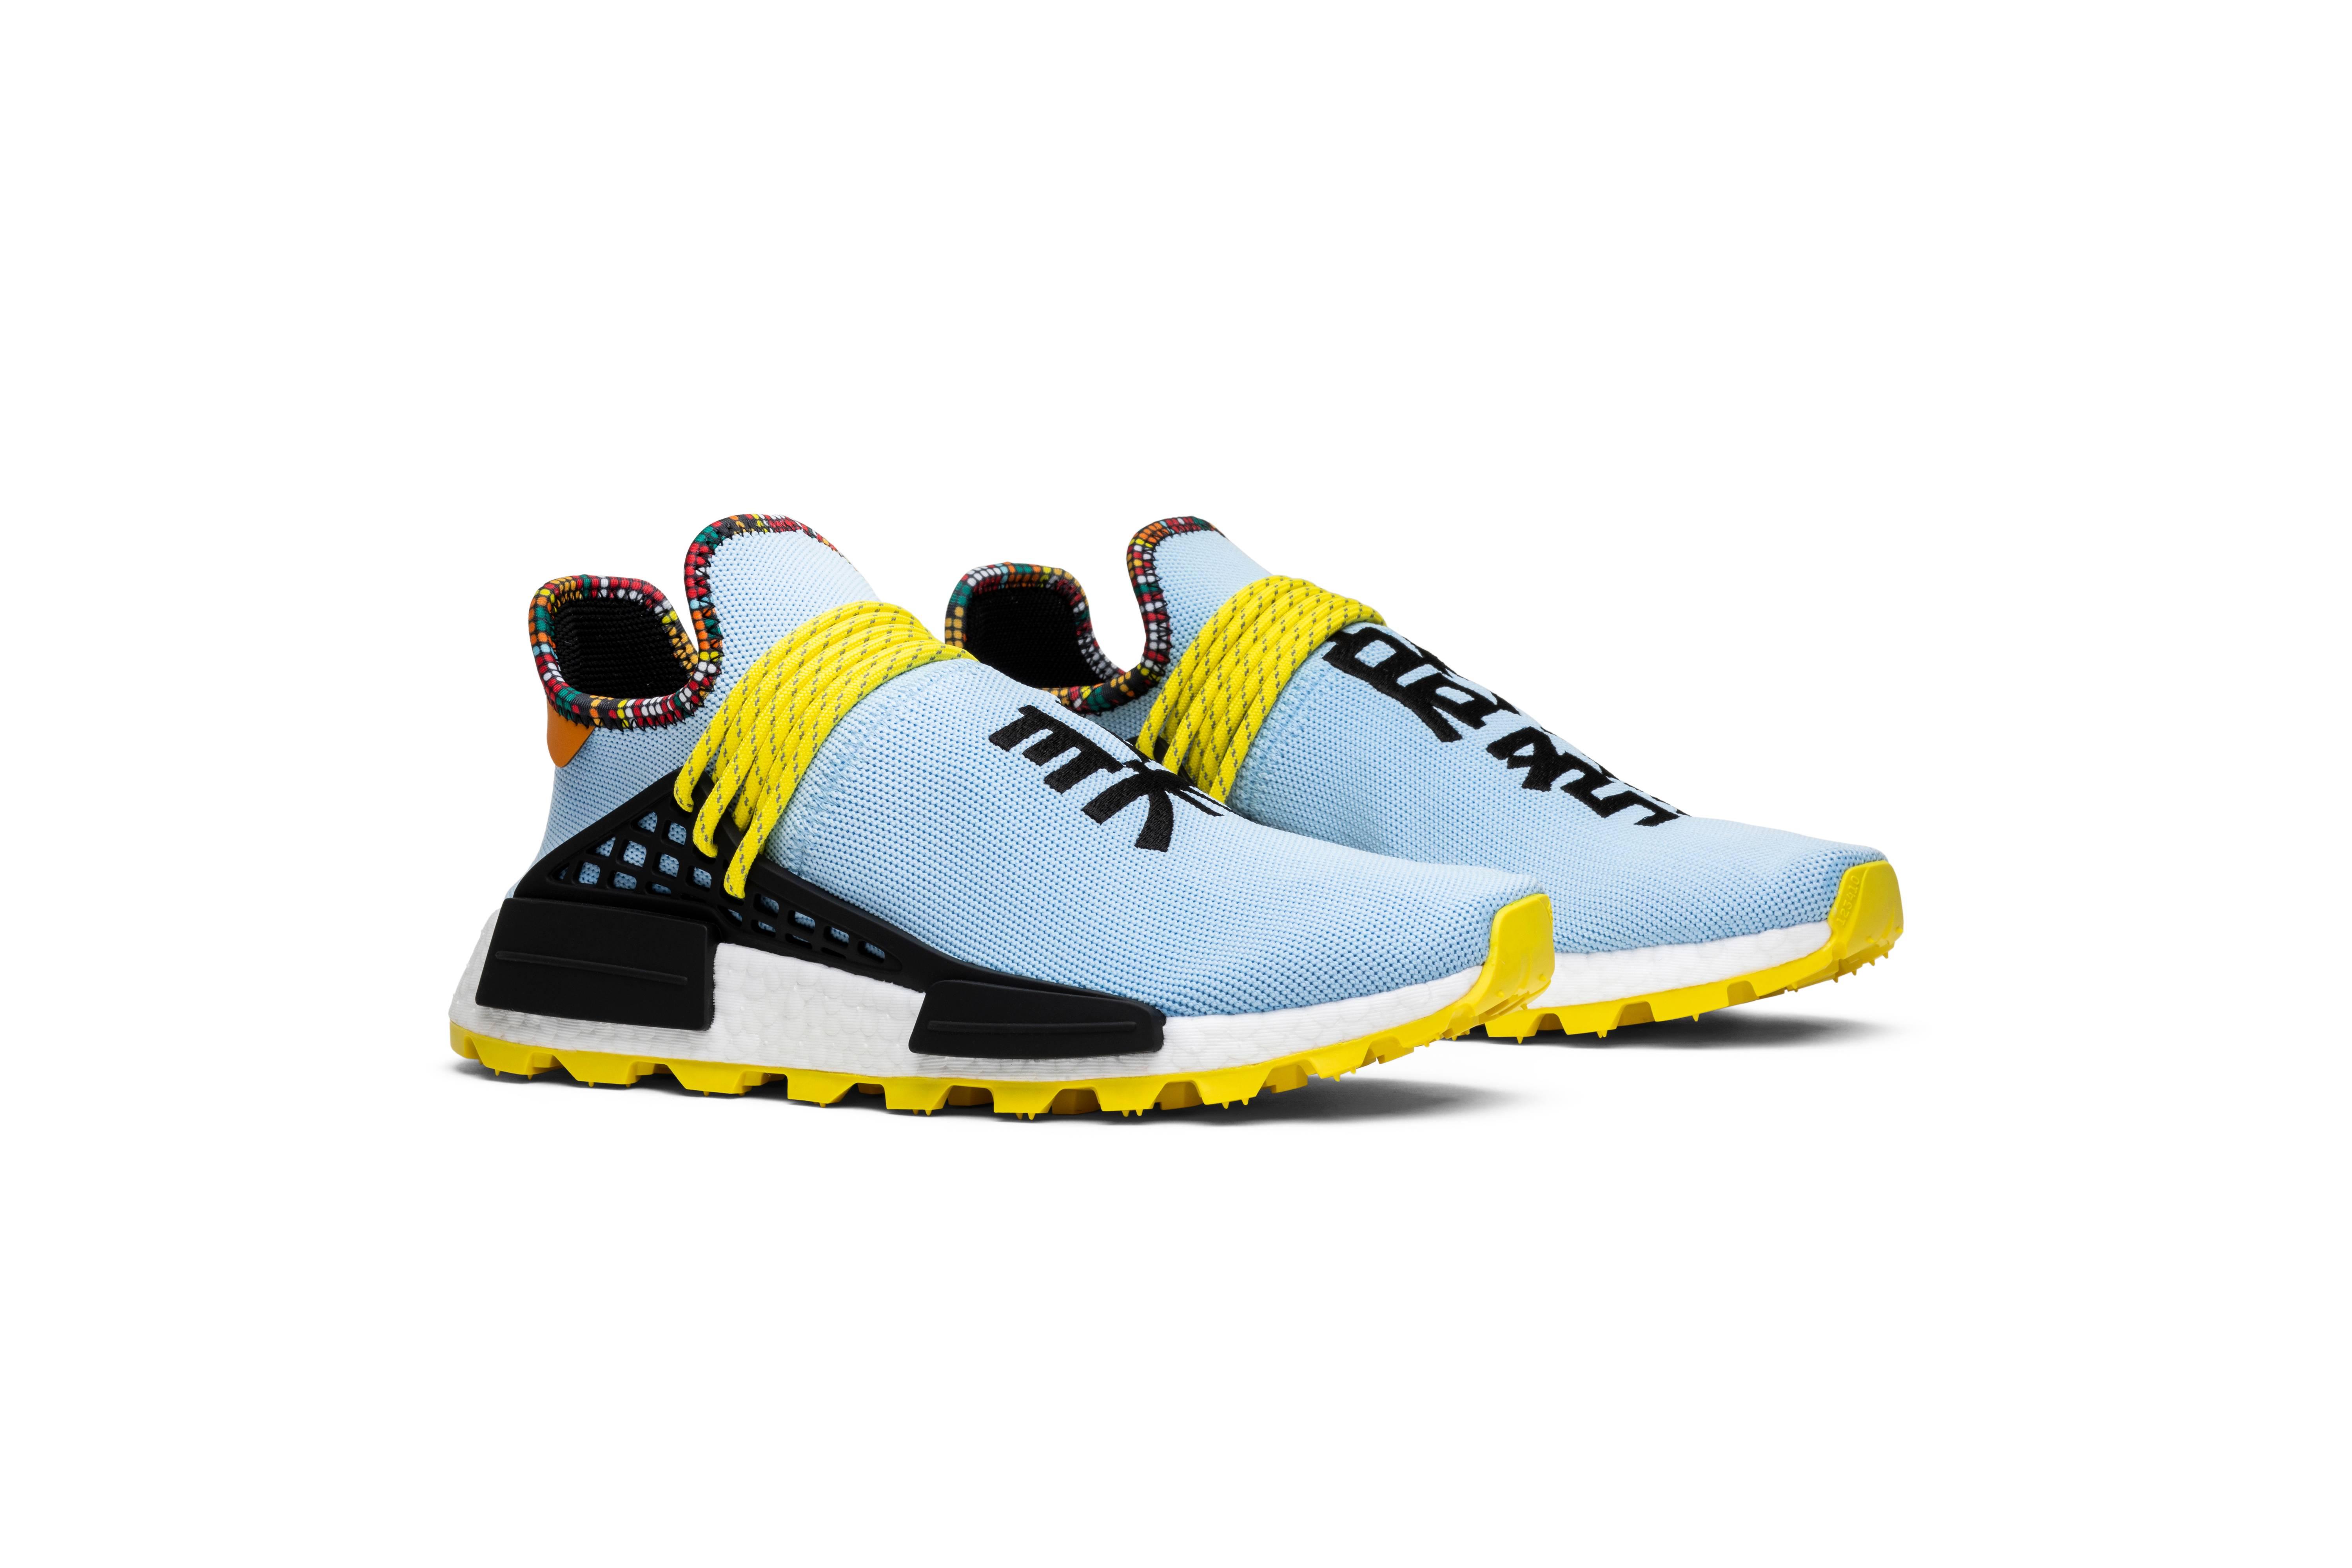 pw solar hu nmd inspiration pack white